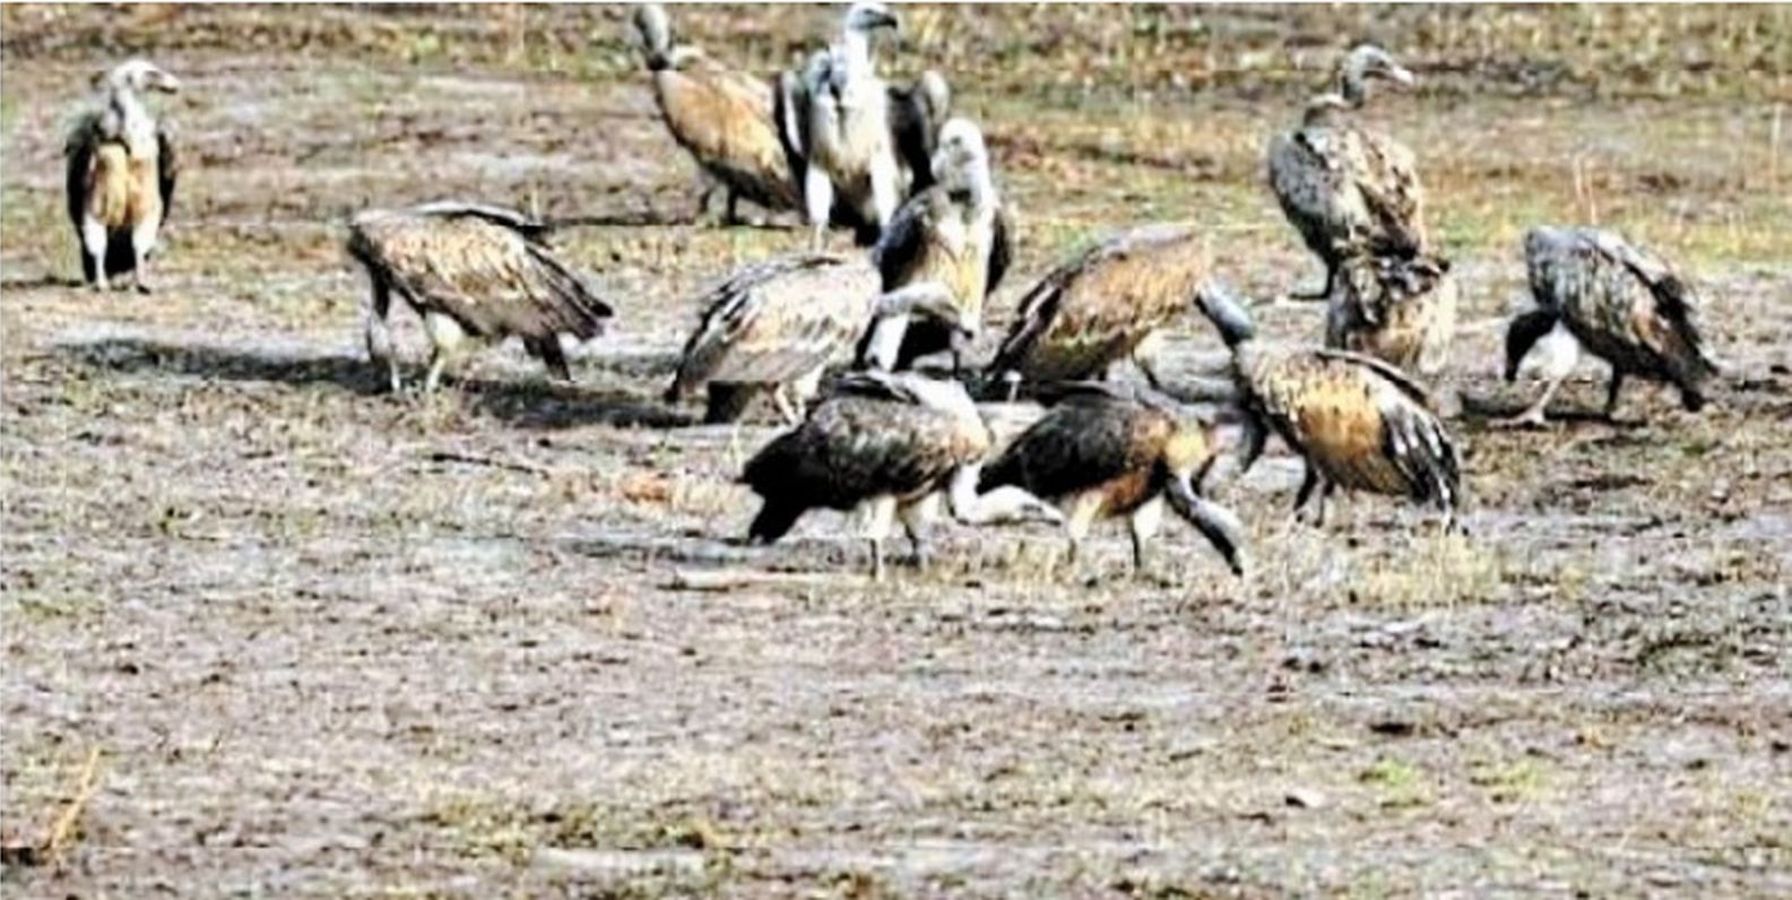 Increase in number of vultures,rare vultures Seen in the forests of MadhyaPradesh